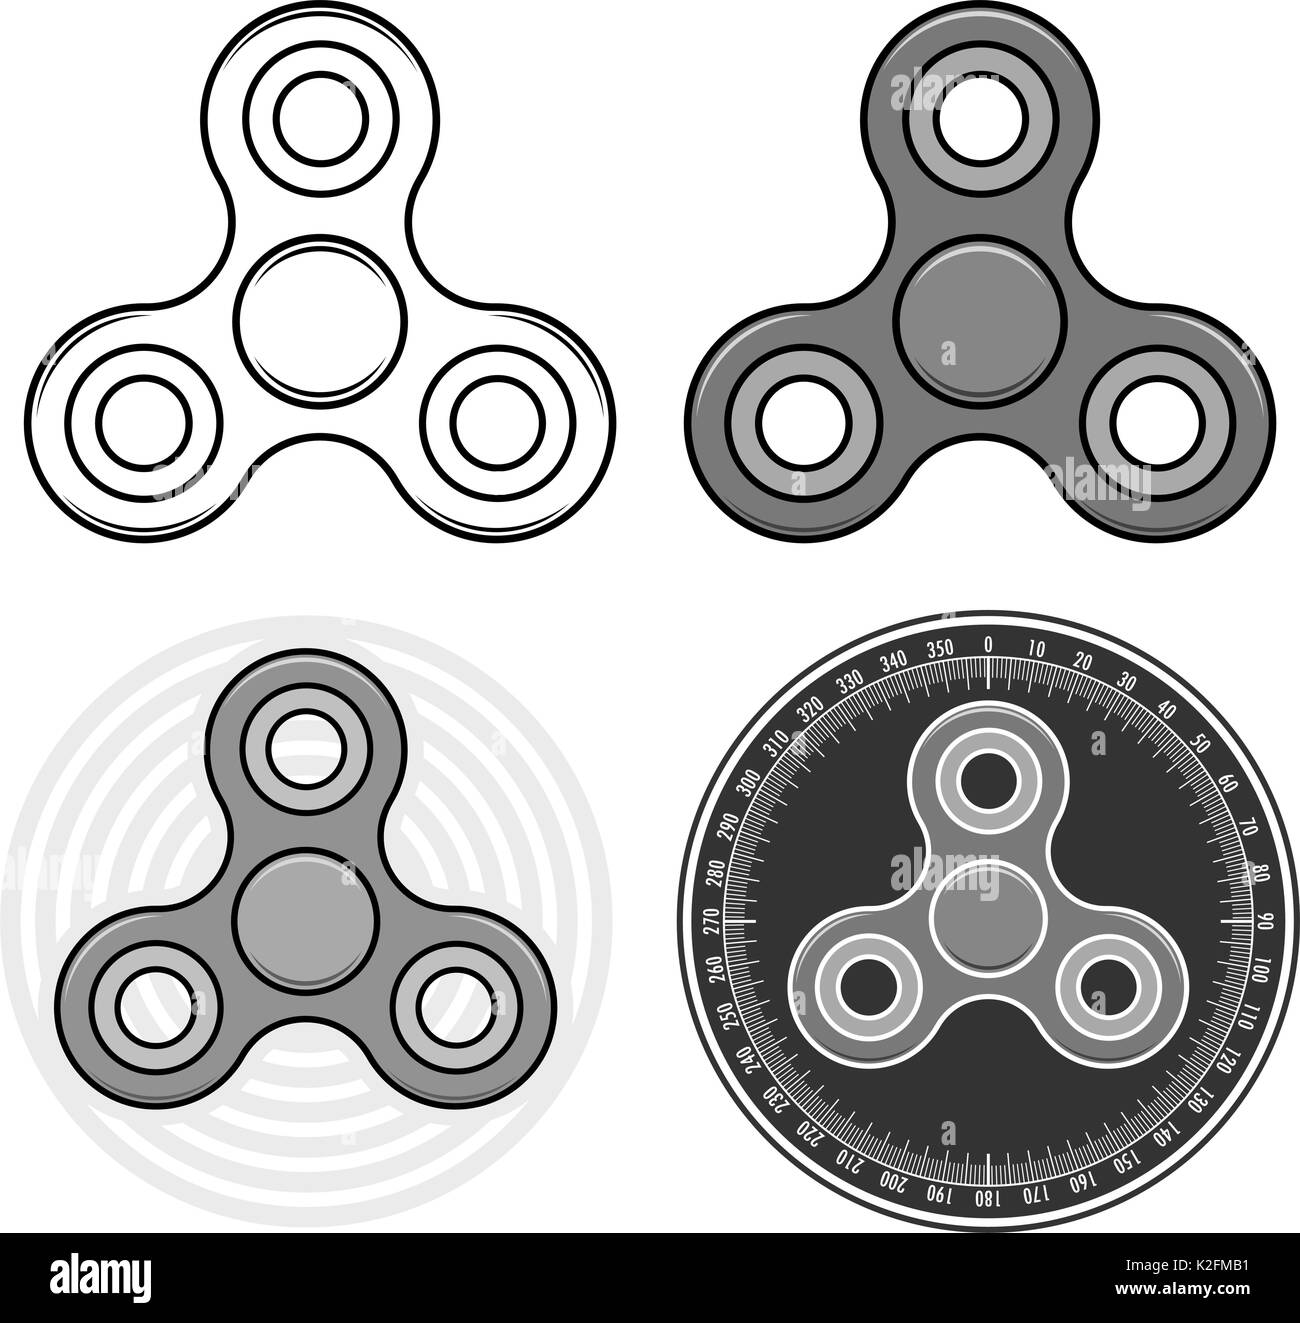 Fidget spinner toys set. Isolated vector icons Stock Vector